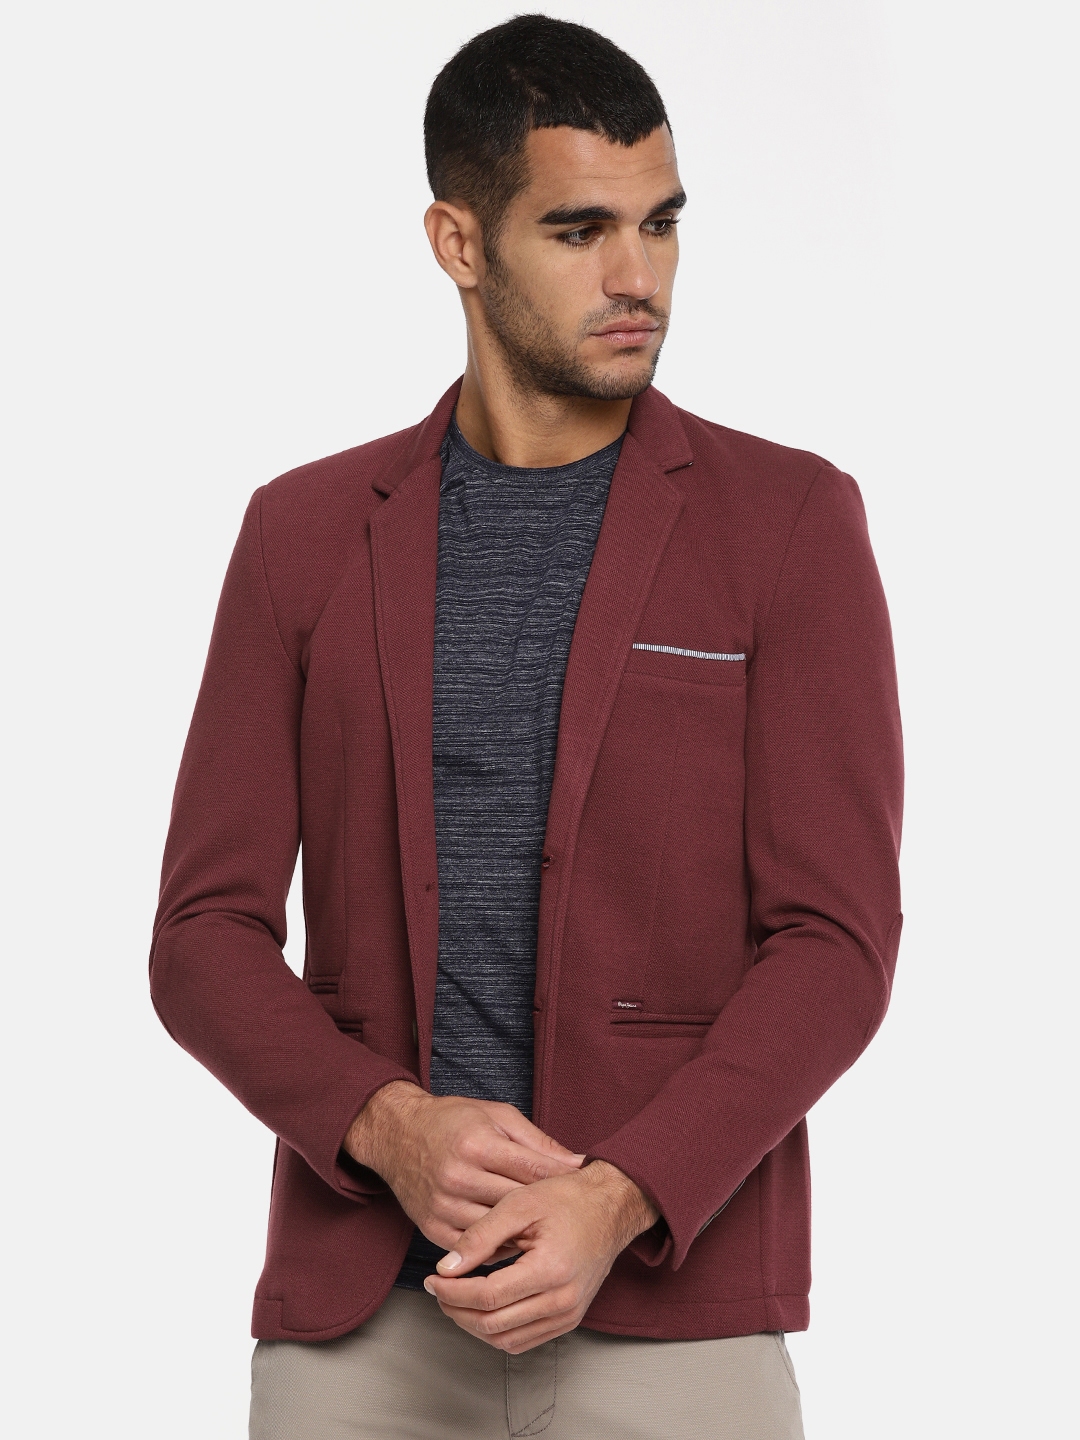 Buy Selyem Men's Slim Fit Stylish Coller Single Breasted Casual Formal  Blazer for Men's (PurpleL) at Amazon.in